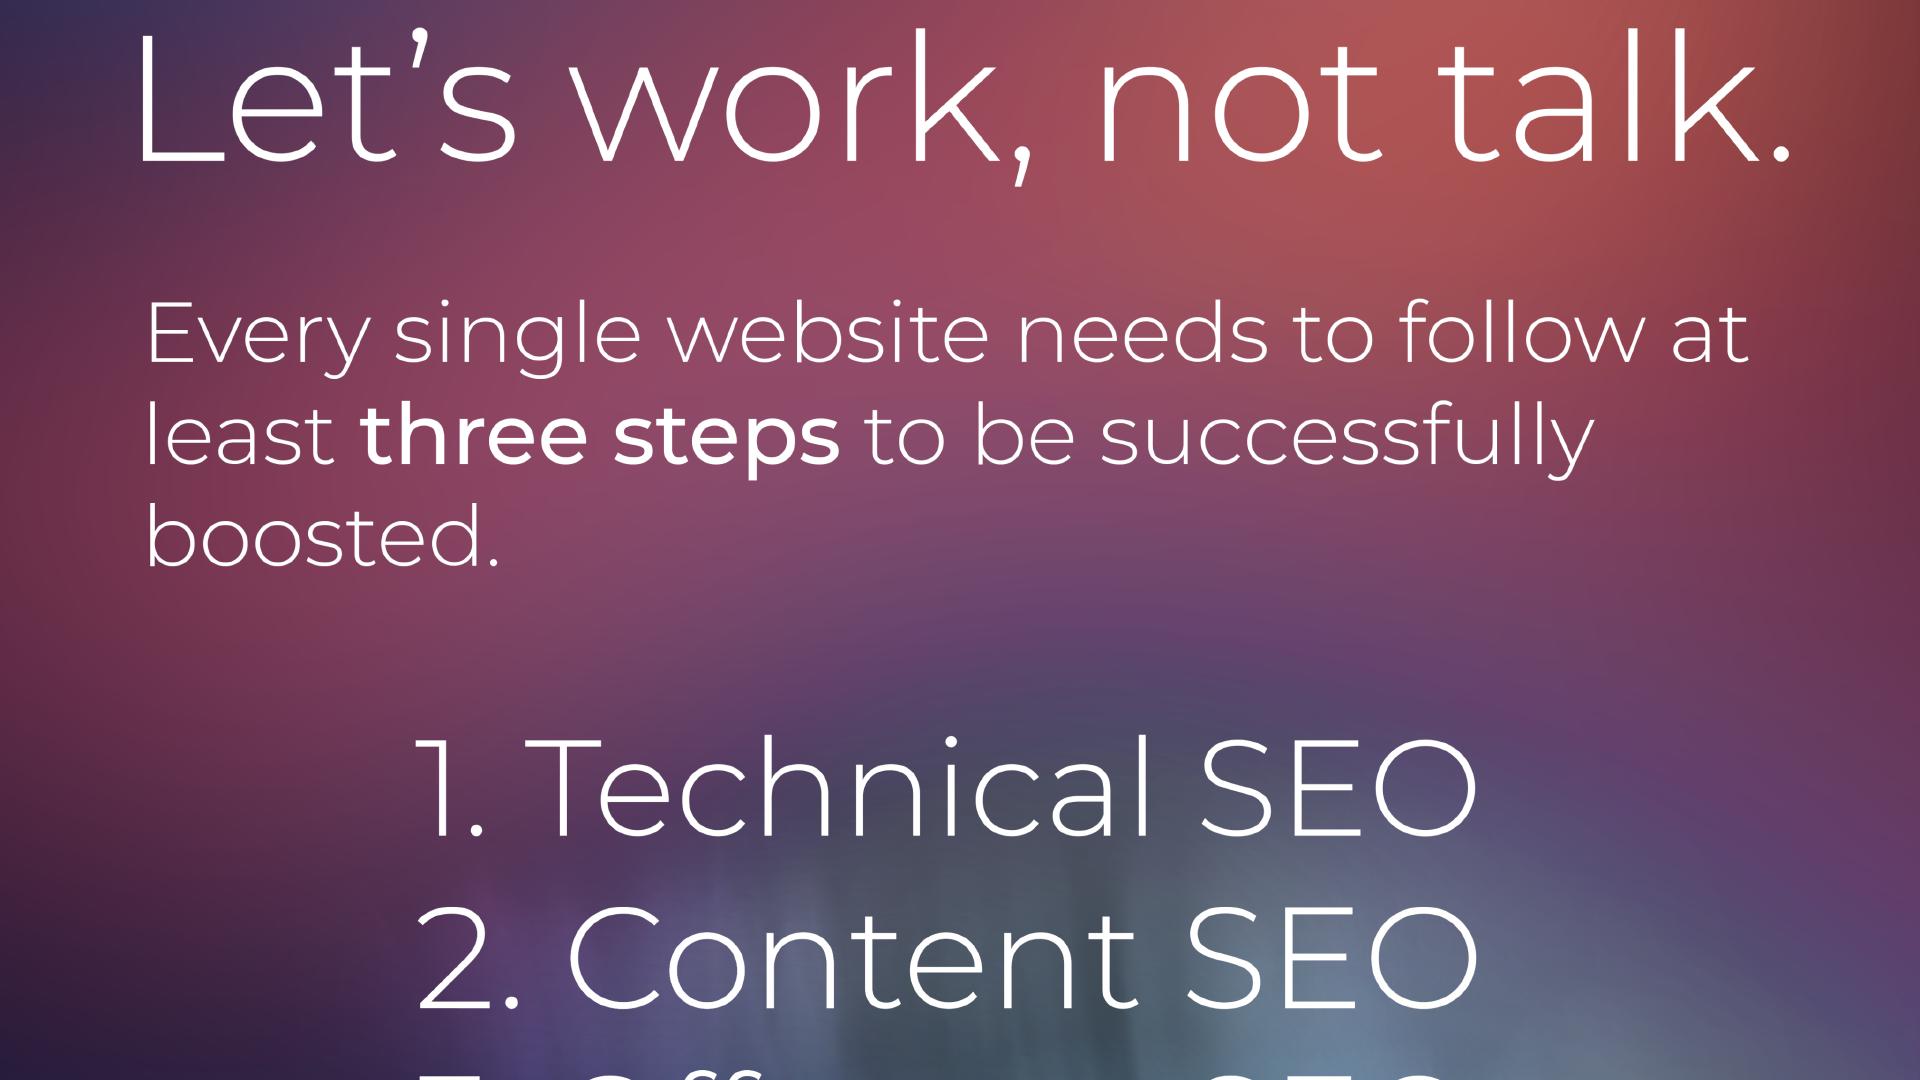 Let’s work, not talk. Every single website needs to follow at least three steps to be successfully boosted. 1. Technical SEO; 2. Content SEO; ...